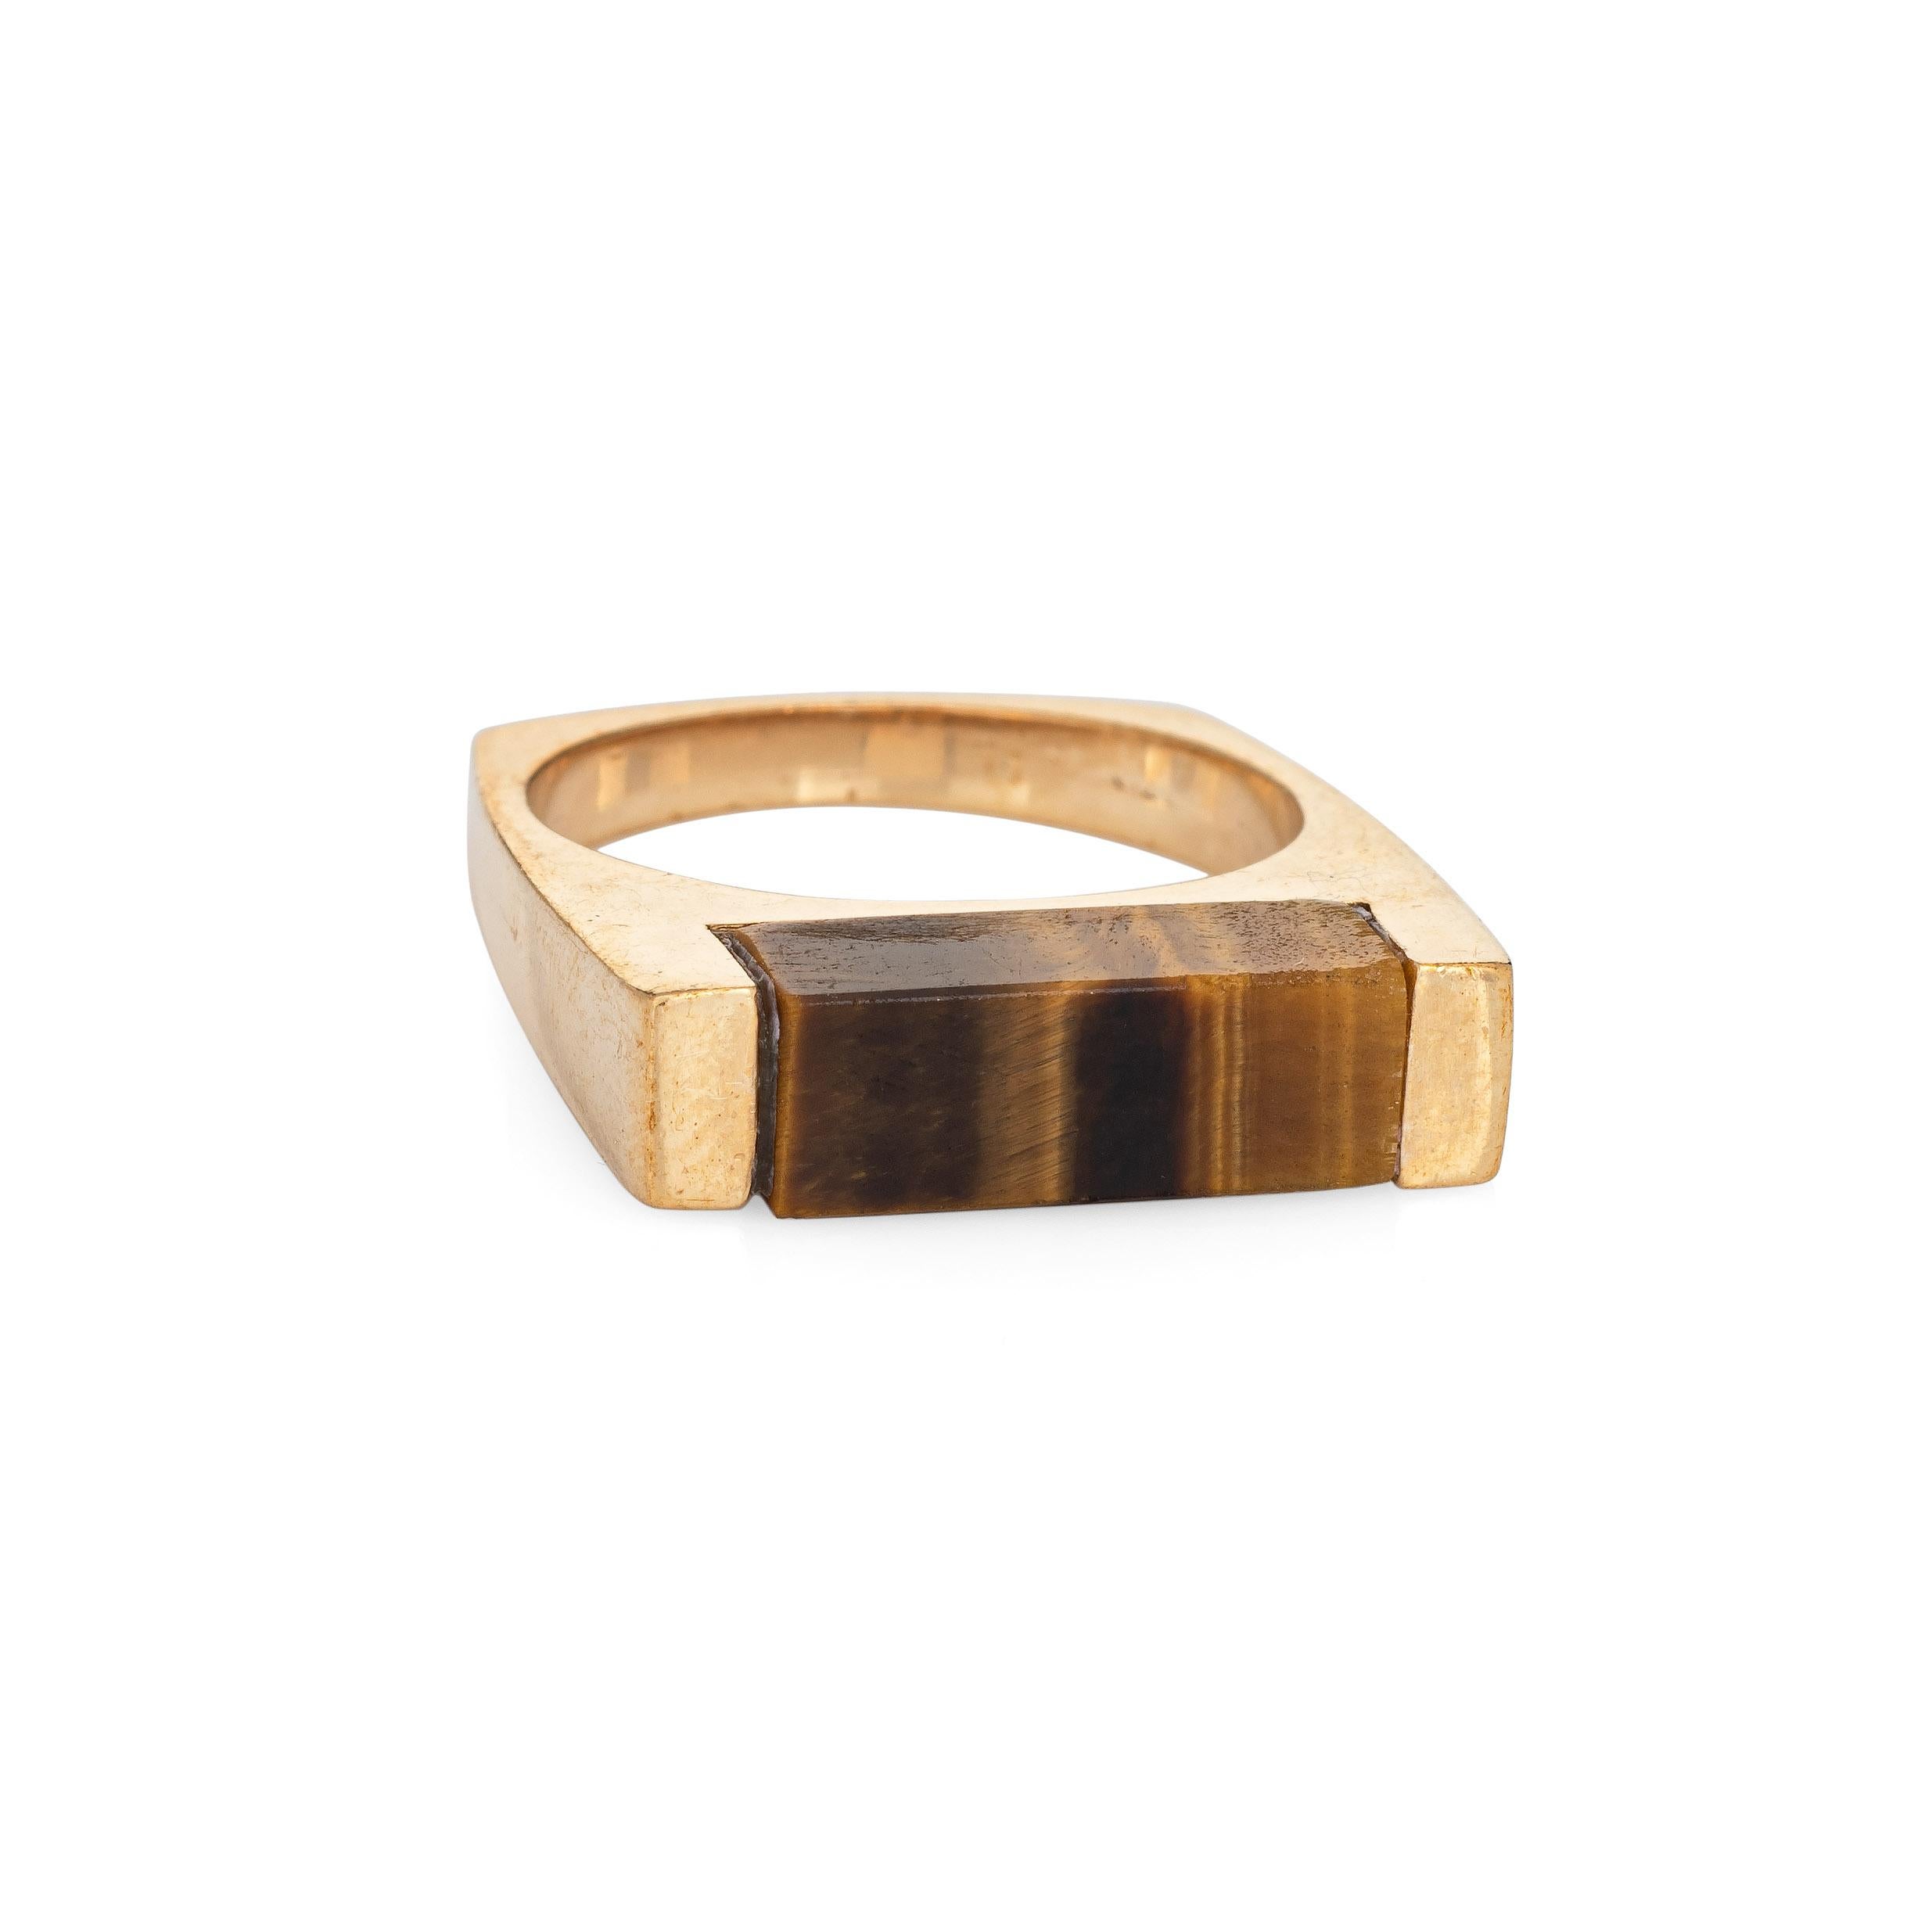 Stylish vintage square stacking ring (circa 1970s to 1980s) crafted in 14 karat yellow gold. 
The band is inlaid with tigers eye measuring 5mm wide (few tiny nibbles to the tigers eye visible under a 10x loupe).

The striking square ring features